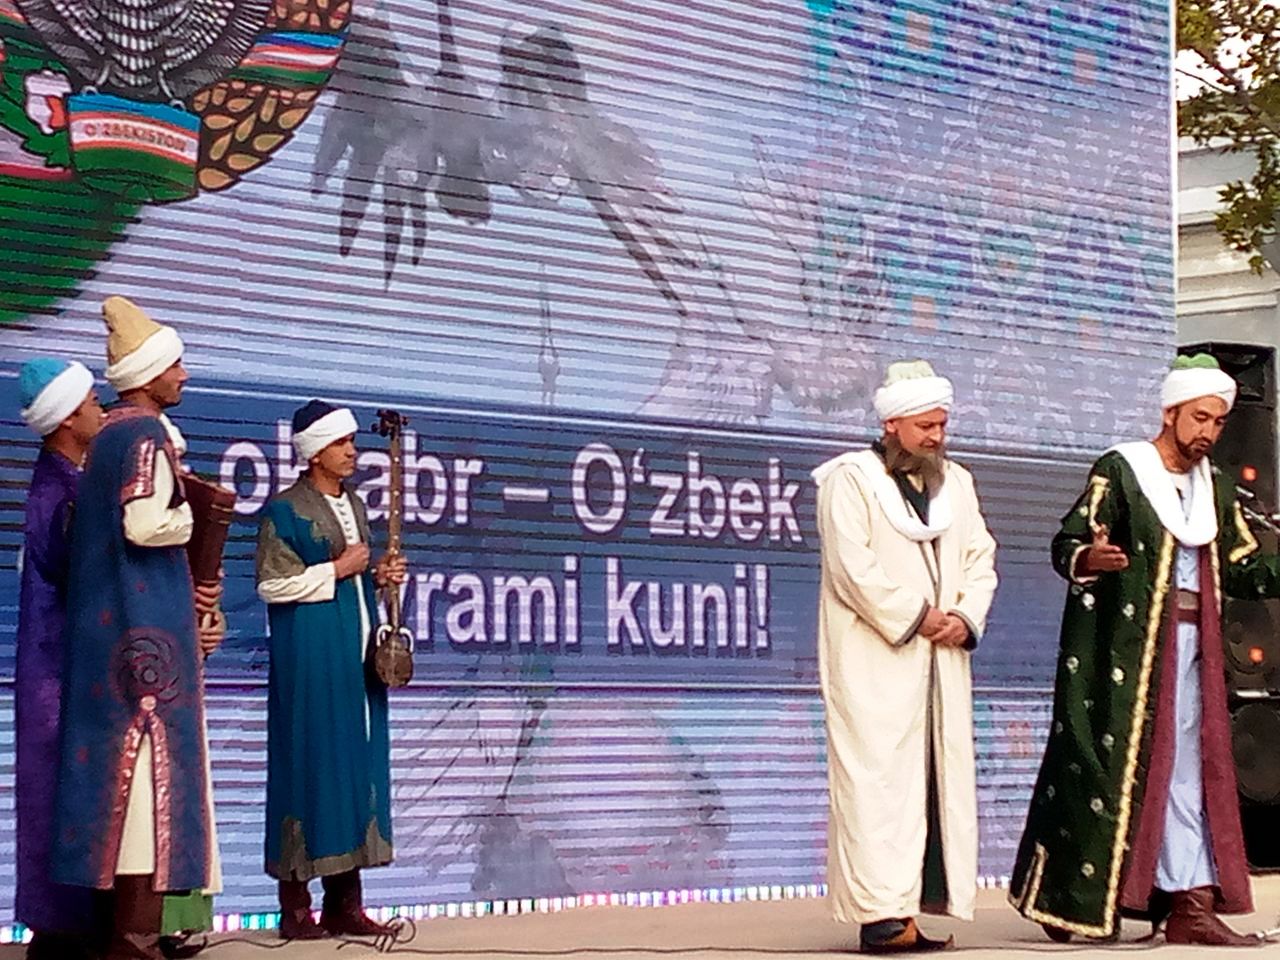 October 21 is the Day of the Uzbek language!